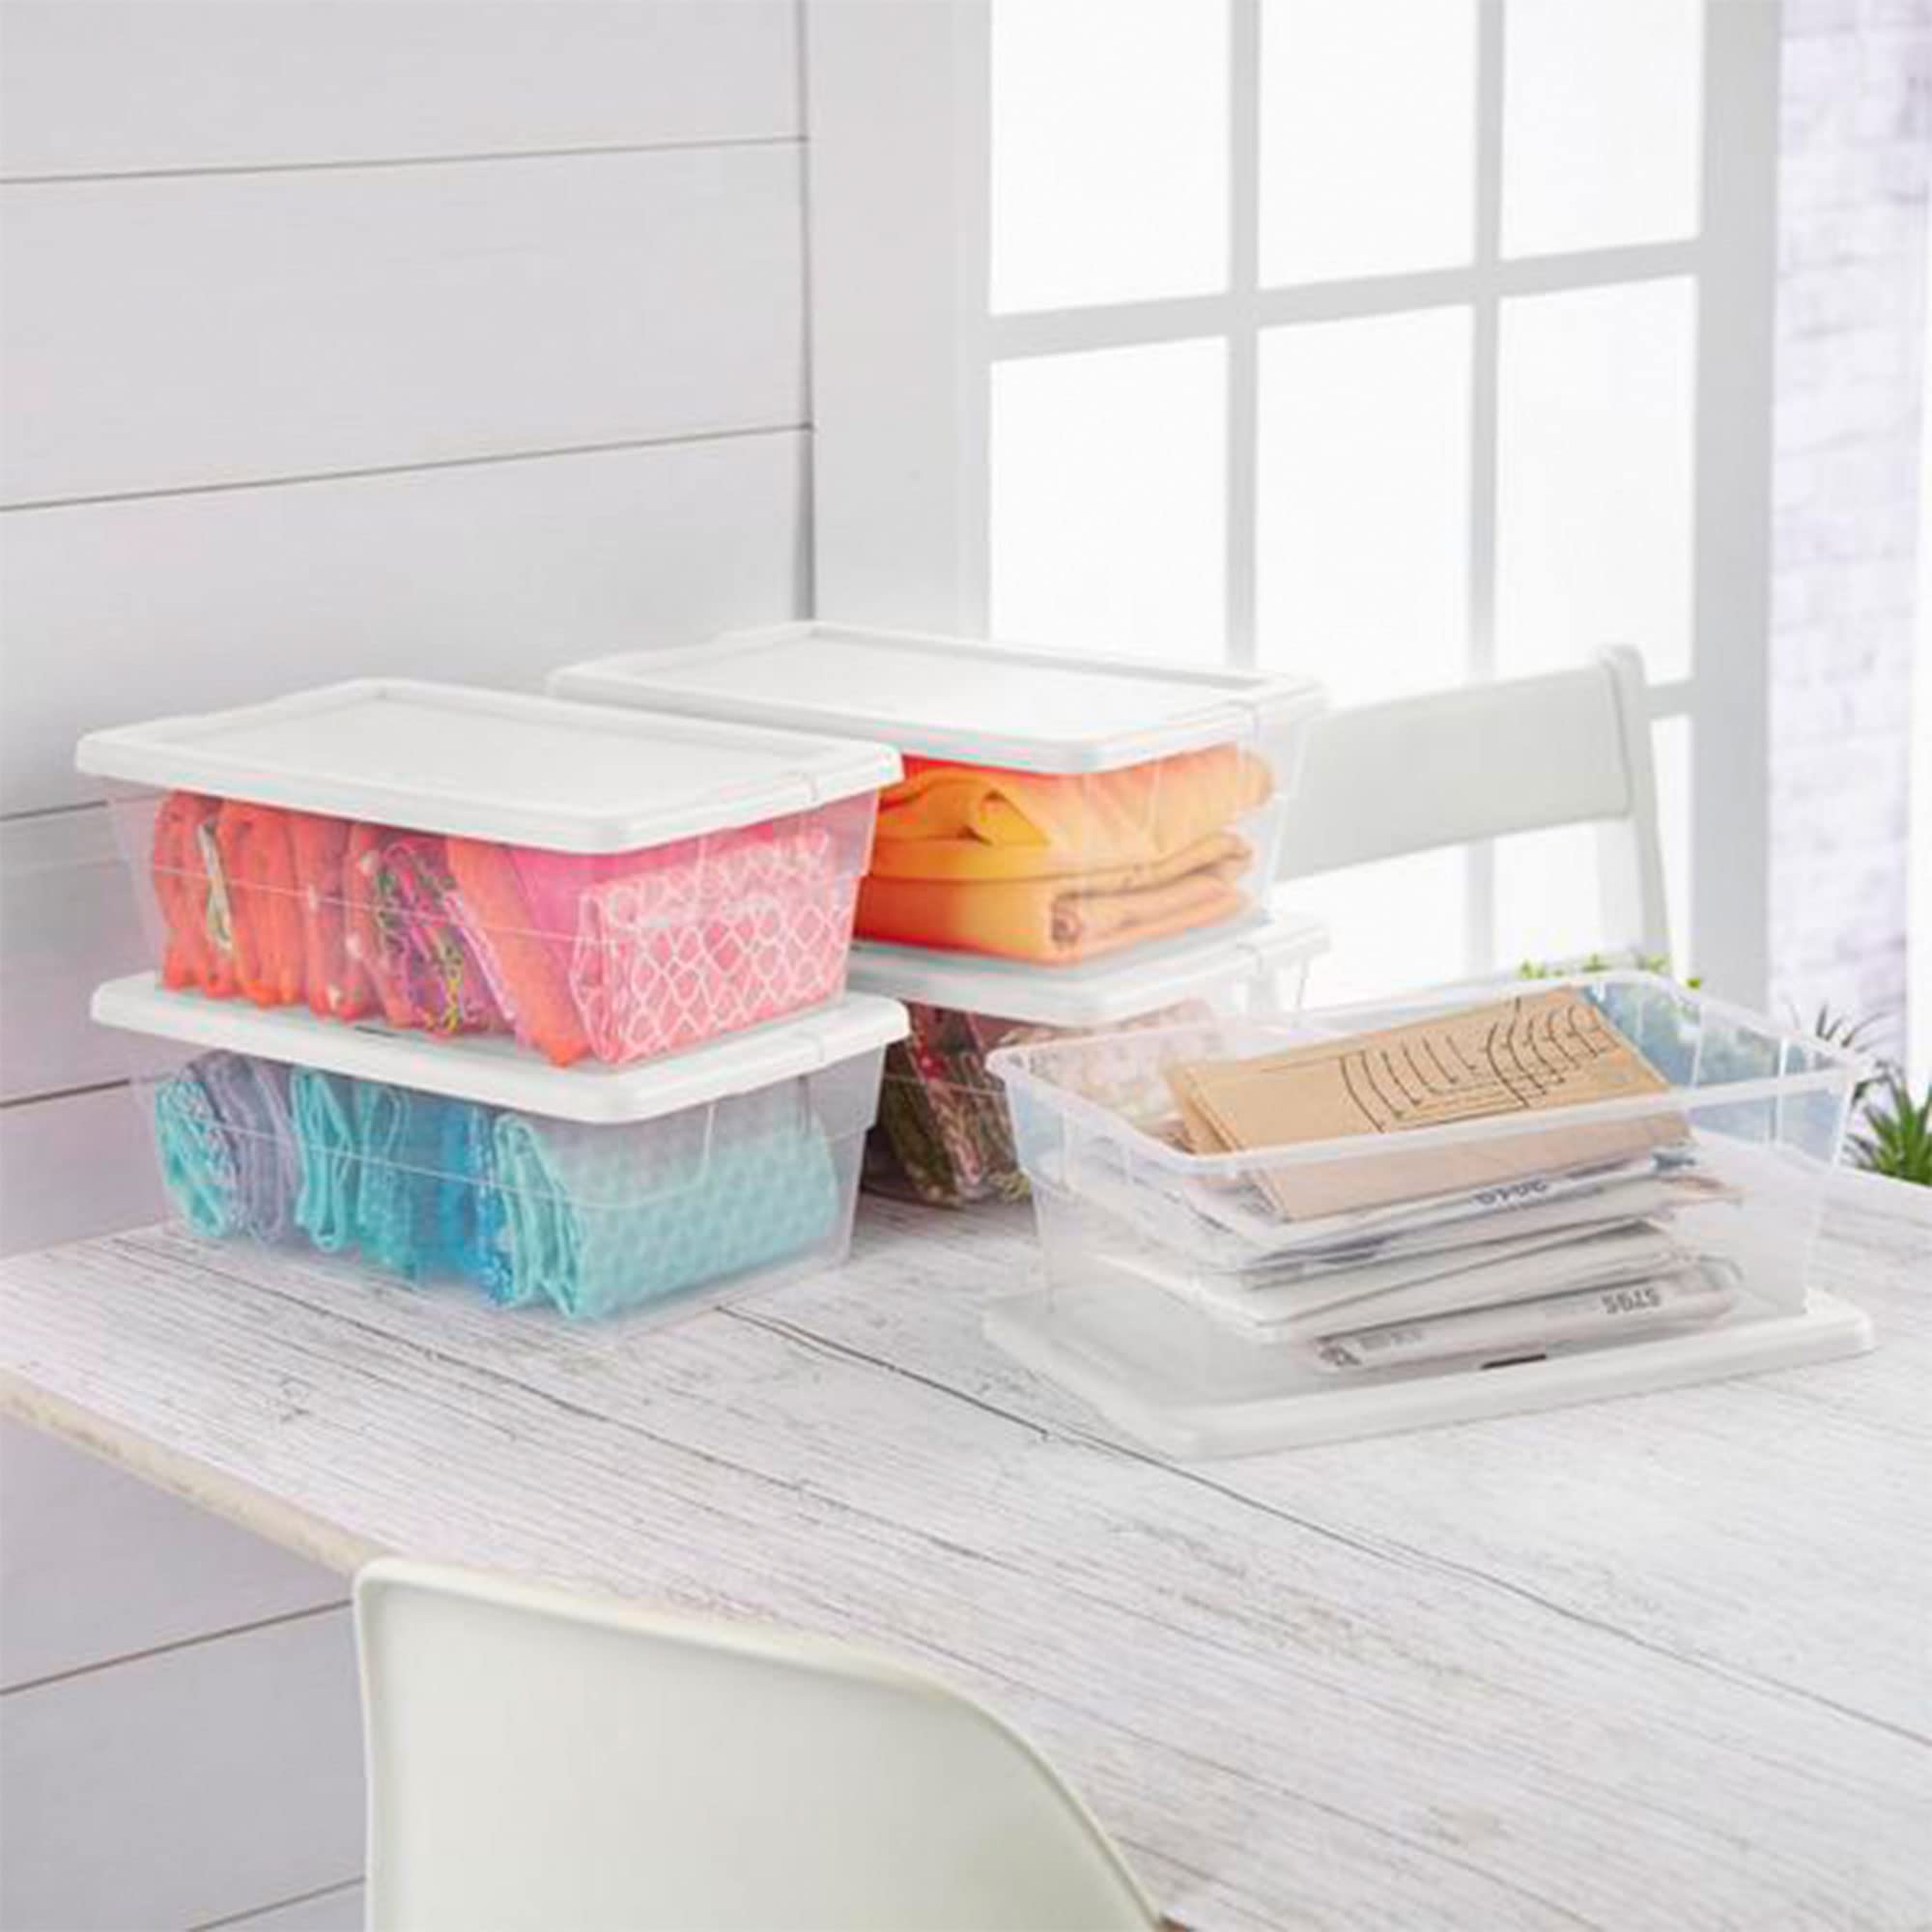 Sterilite 6 Quart Clear Stacking Closet Storage Tote Container with White Lid